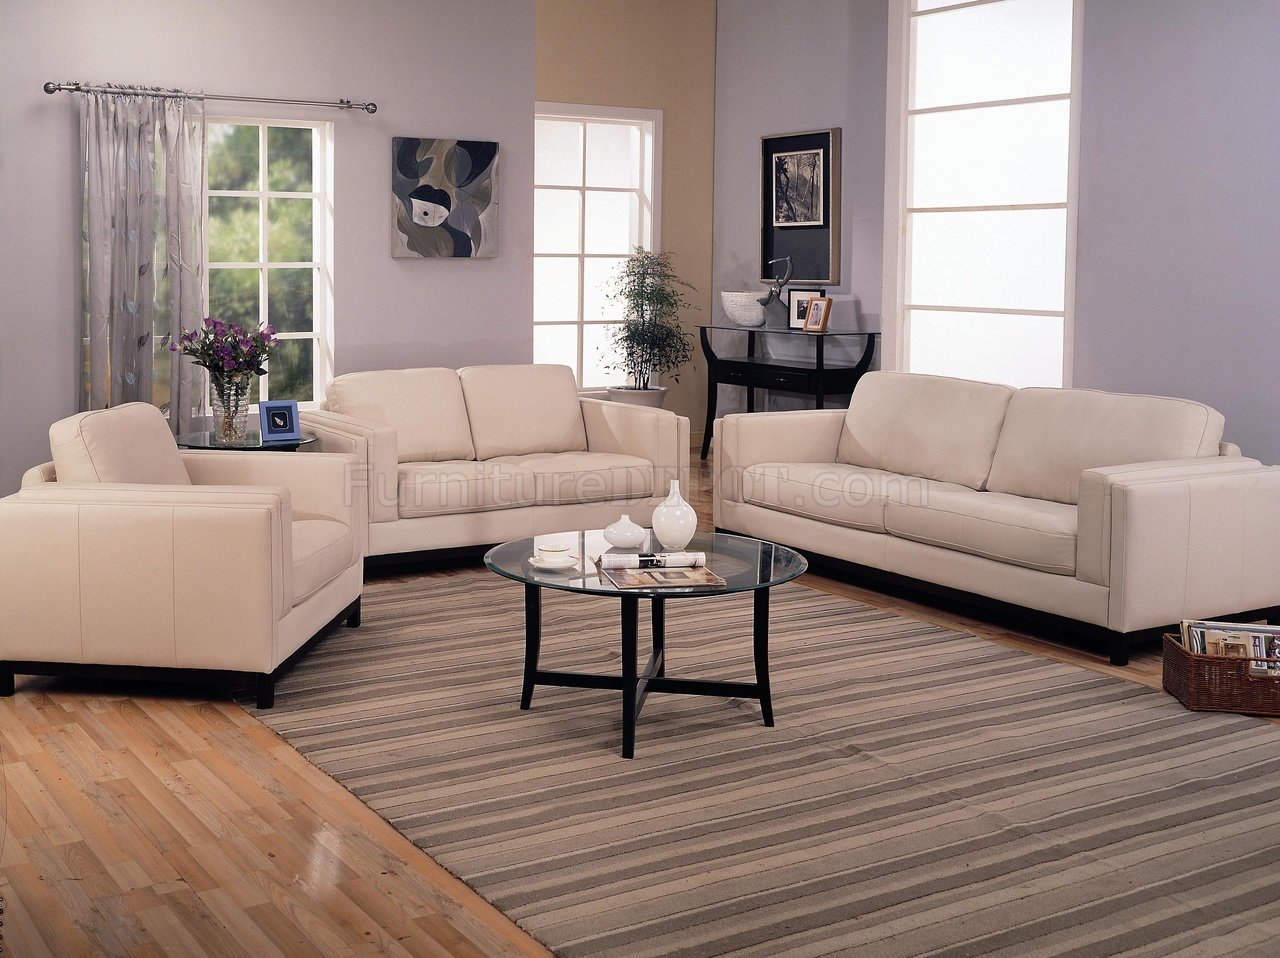 living room with cream leather sofa and loveseat